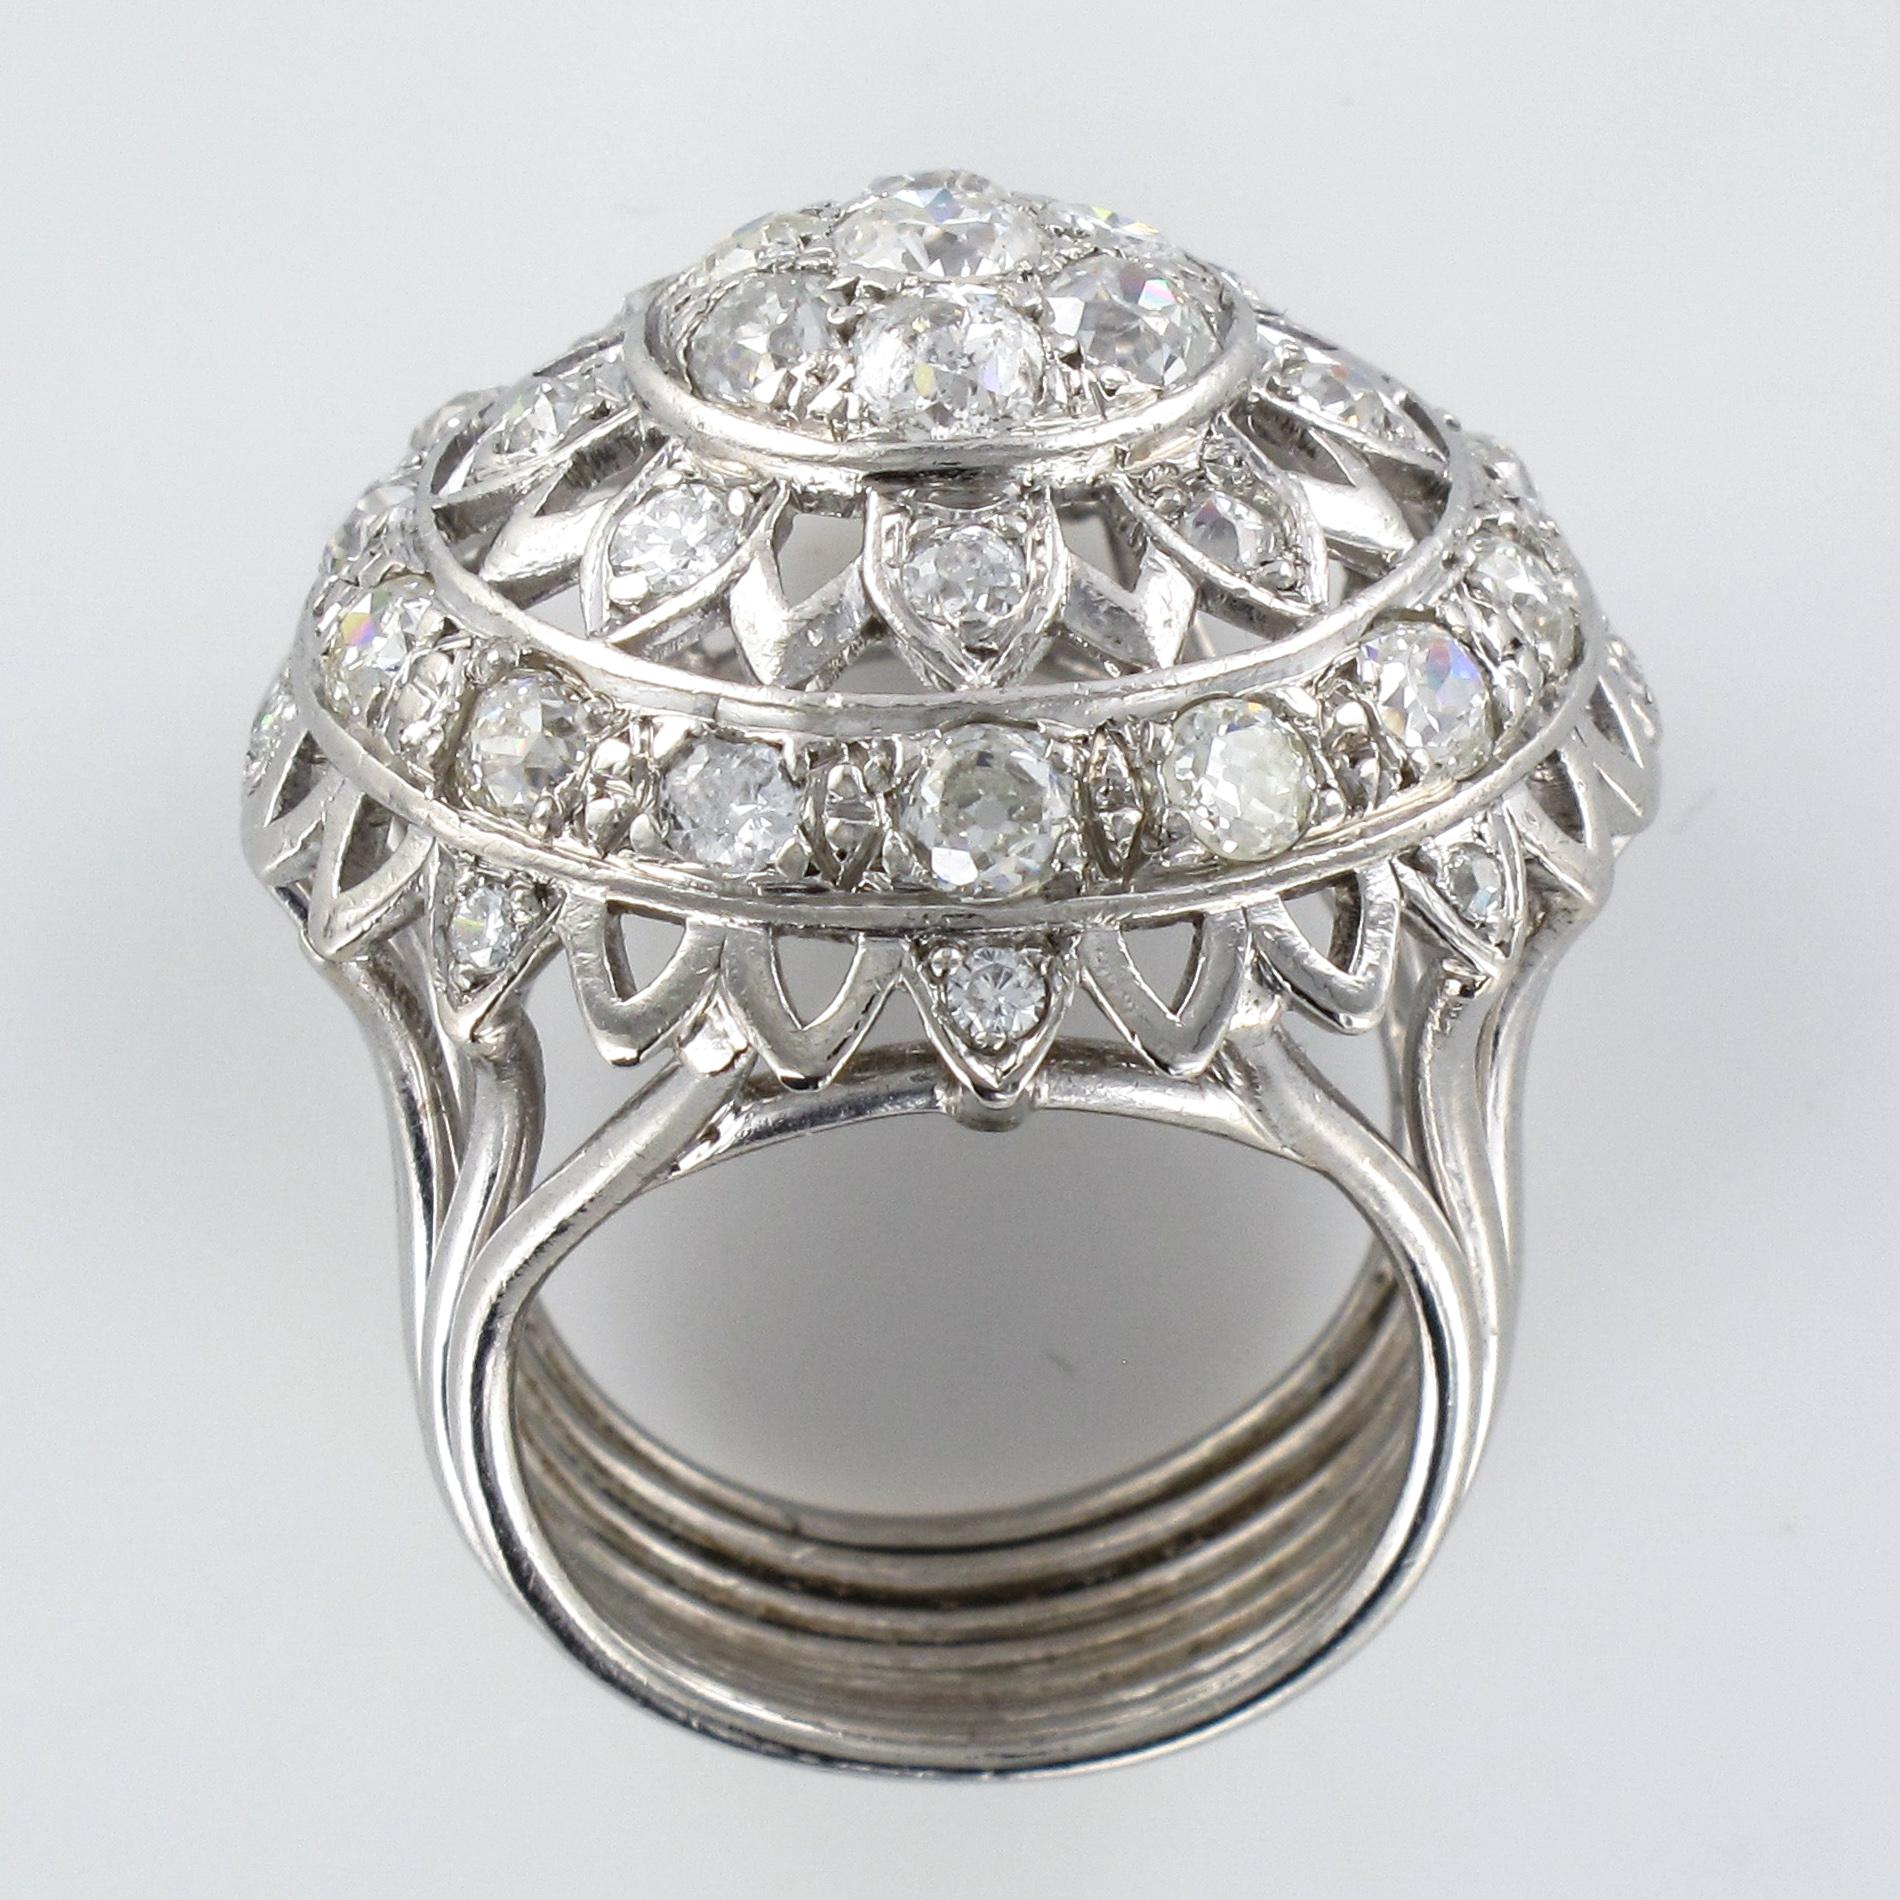 French 1960s 4.20 Carat Diamonds 18 Karat White Gold Cocktail Ring For Sale 12